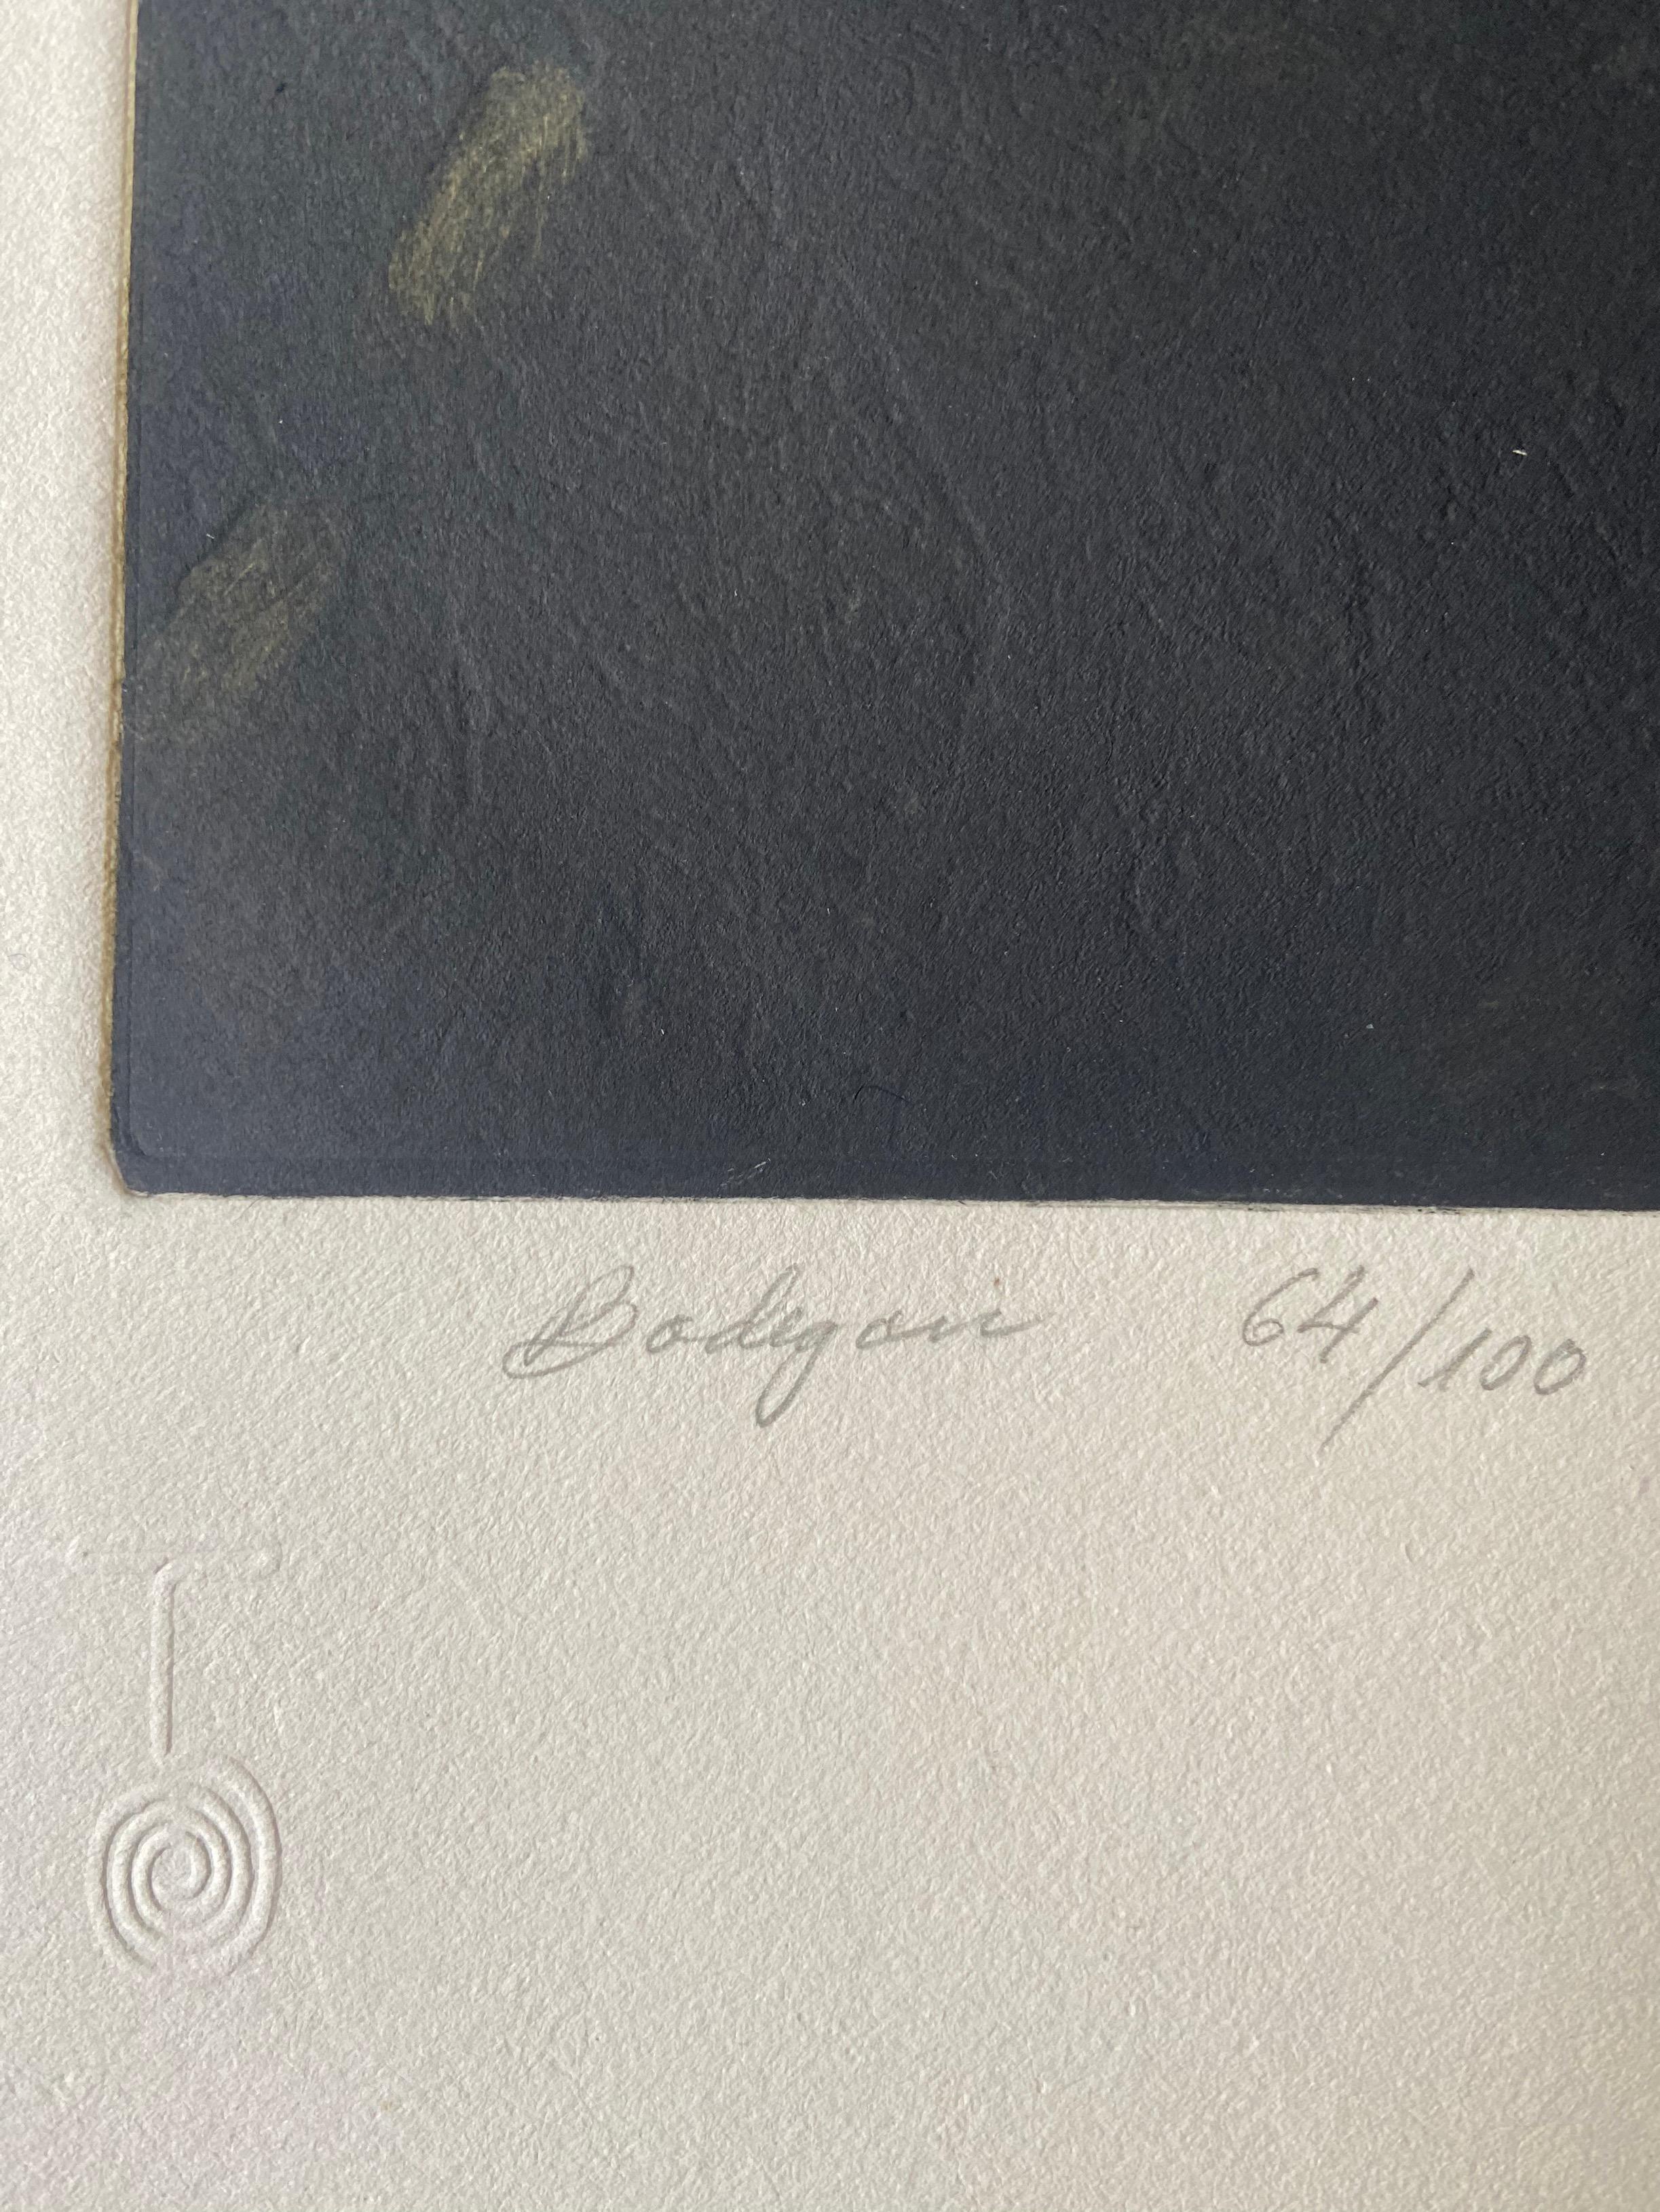 Very high quality carborundum engraving 
Signed, titled and numbered 70/100
Paper size : 76x58
Size of work : 63,5x49,5
Circa 1970
Paper Sala Gaspar Barcelona 
390€